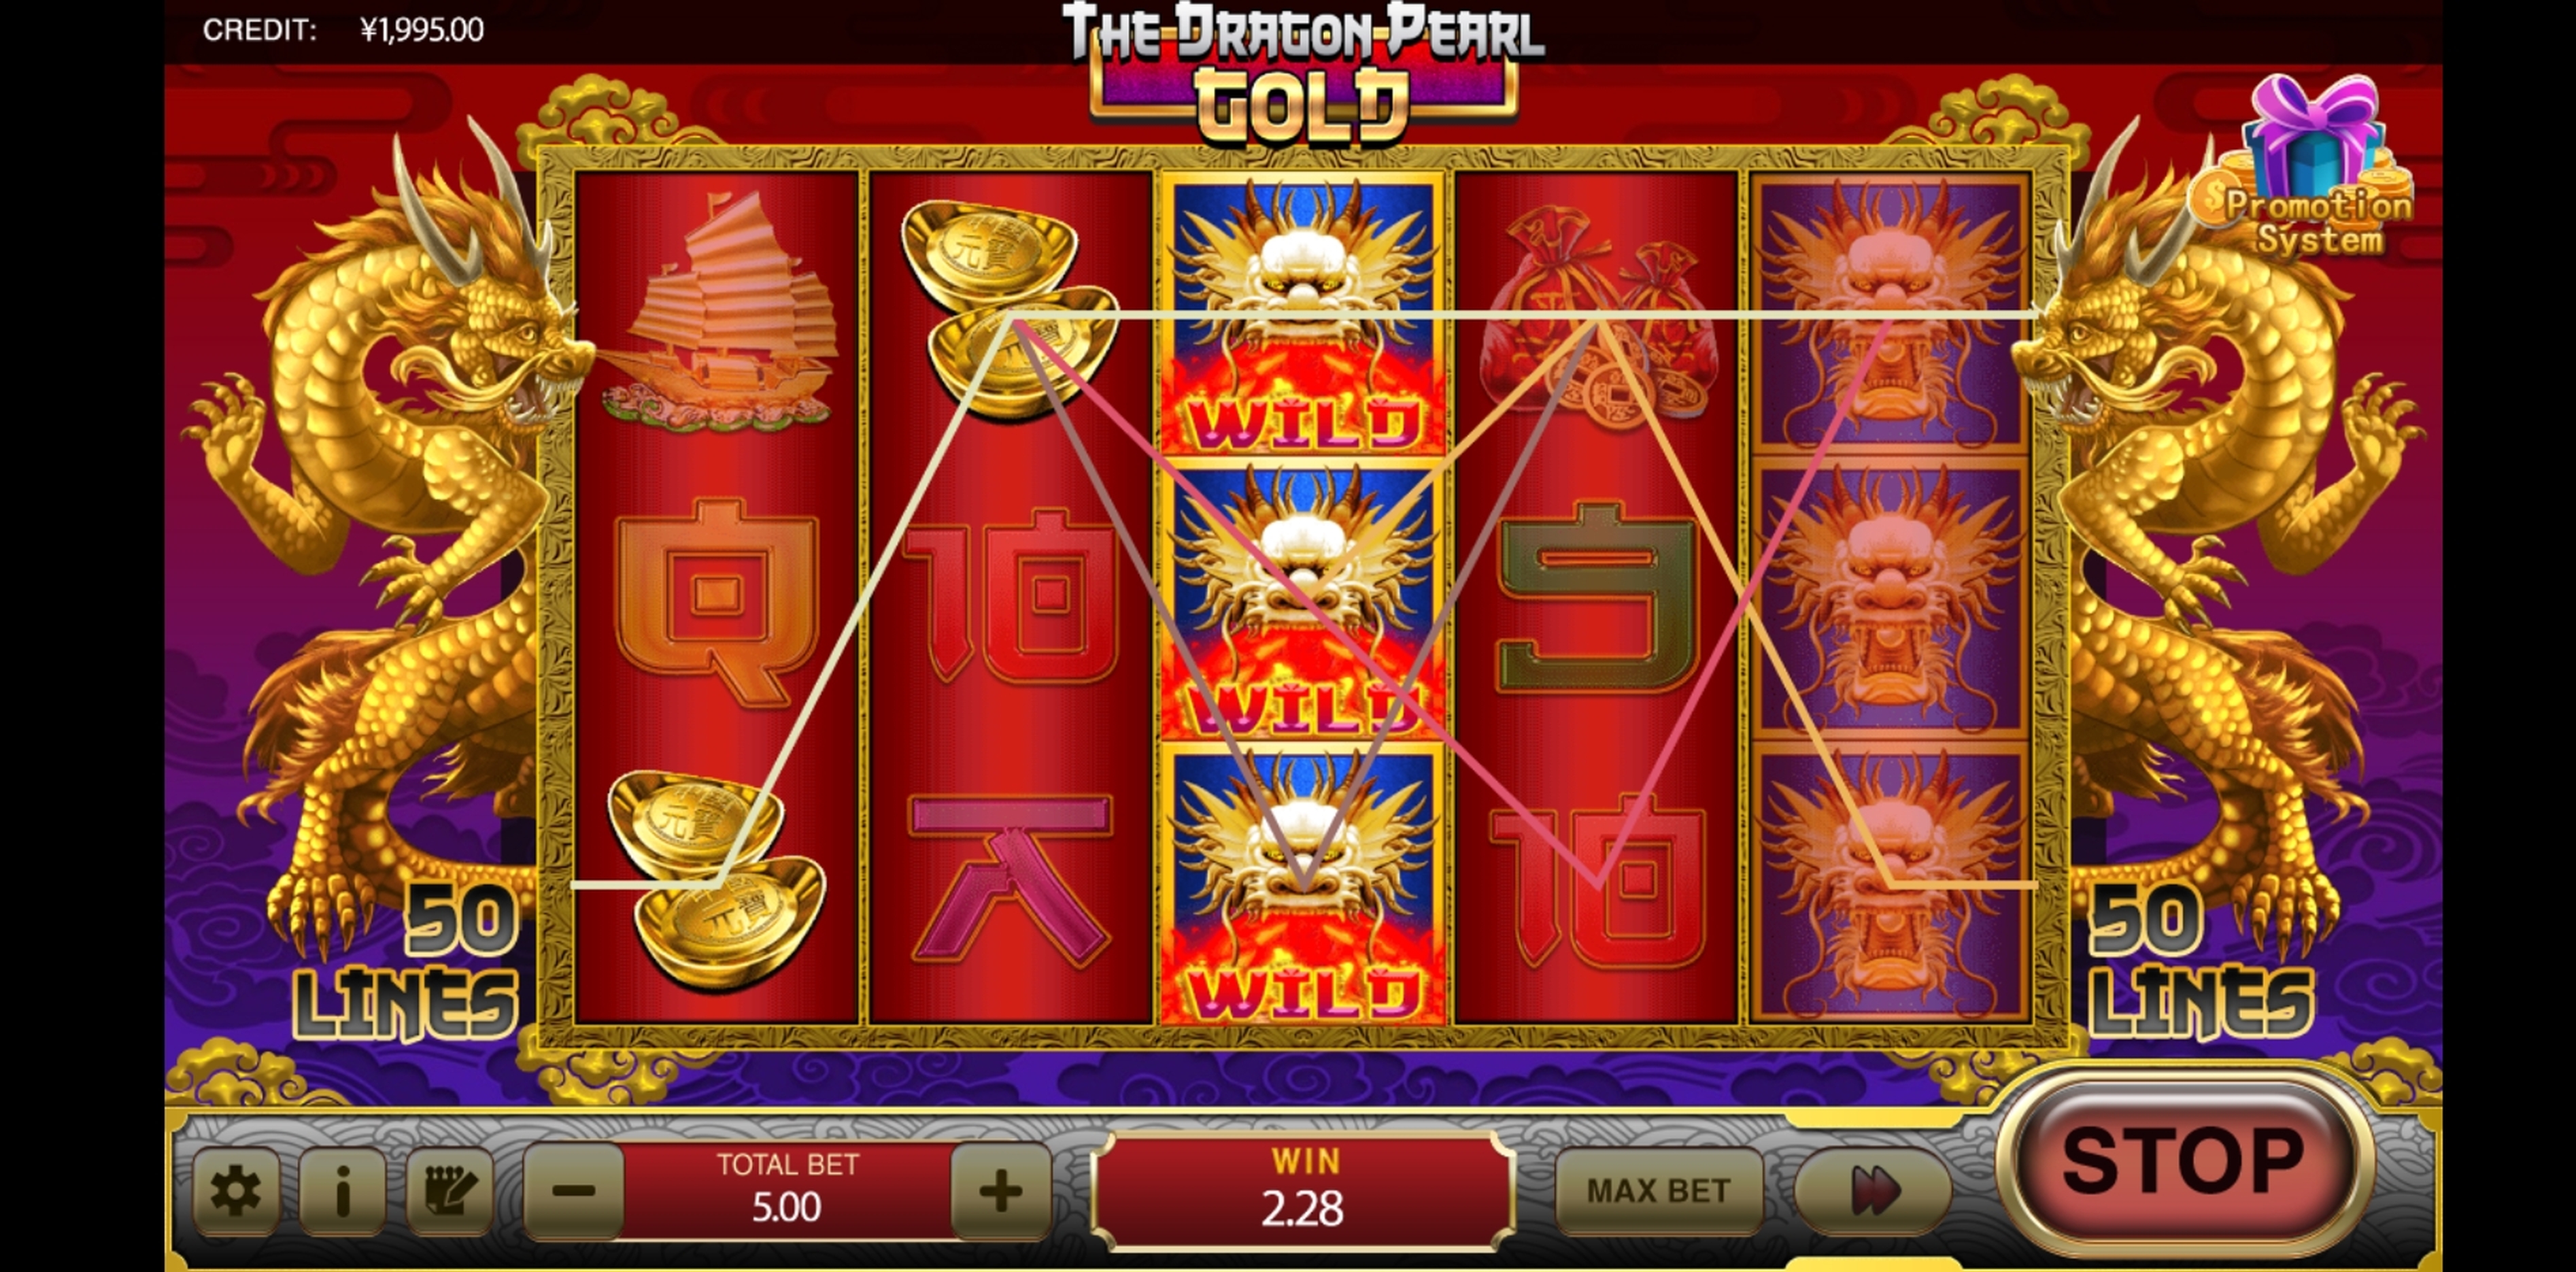 Win Money in The Dragon Pearl Gold Free Slot Game by XIN Gaming